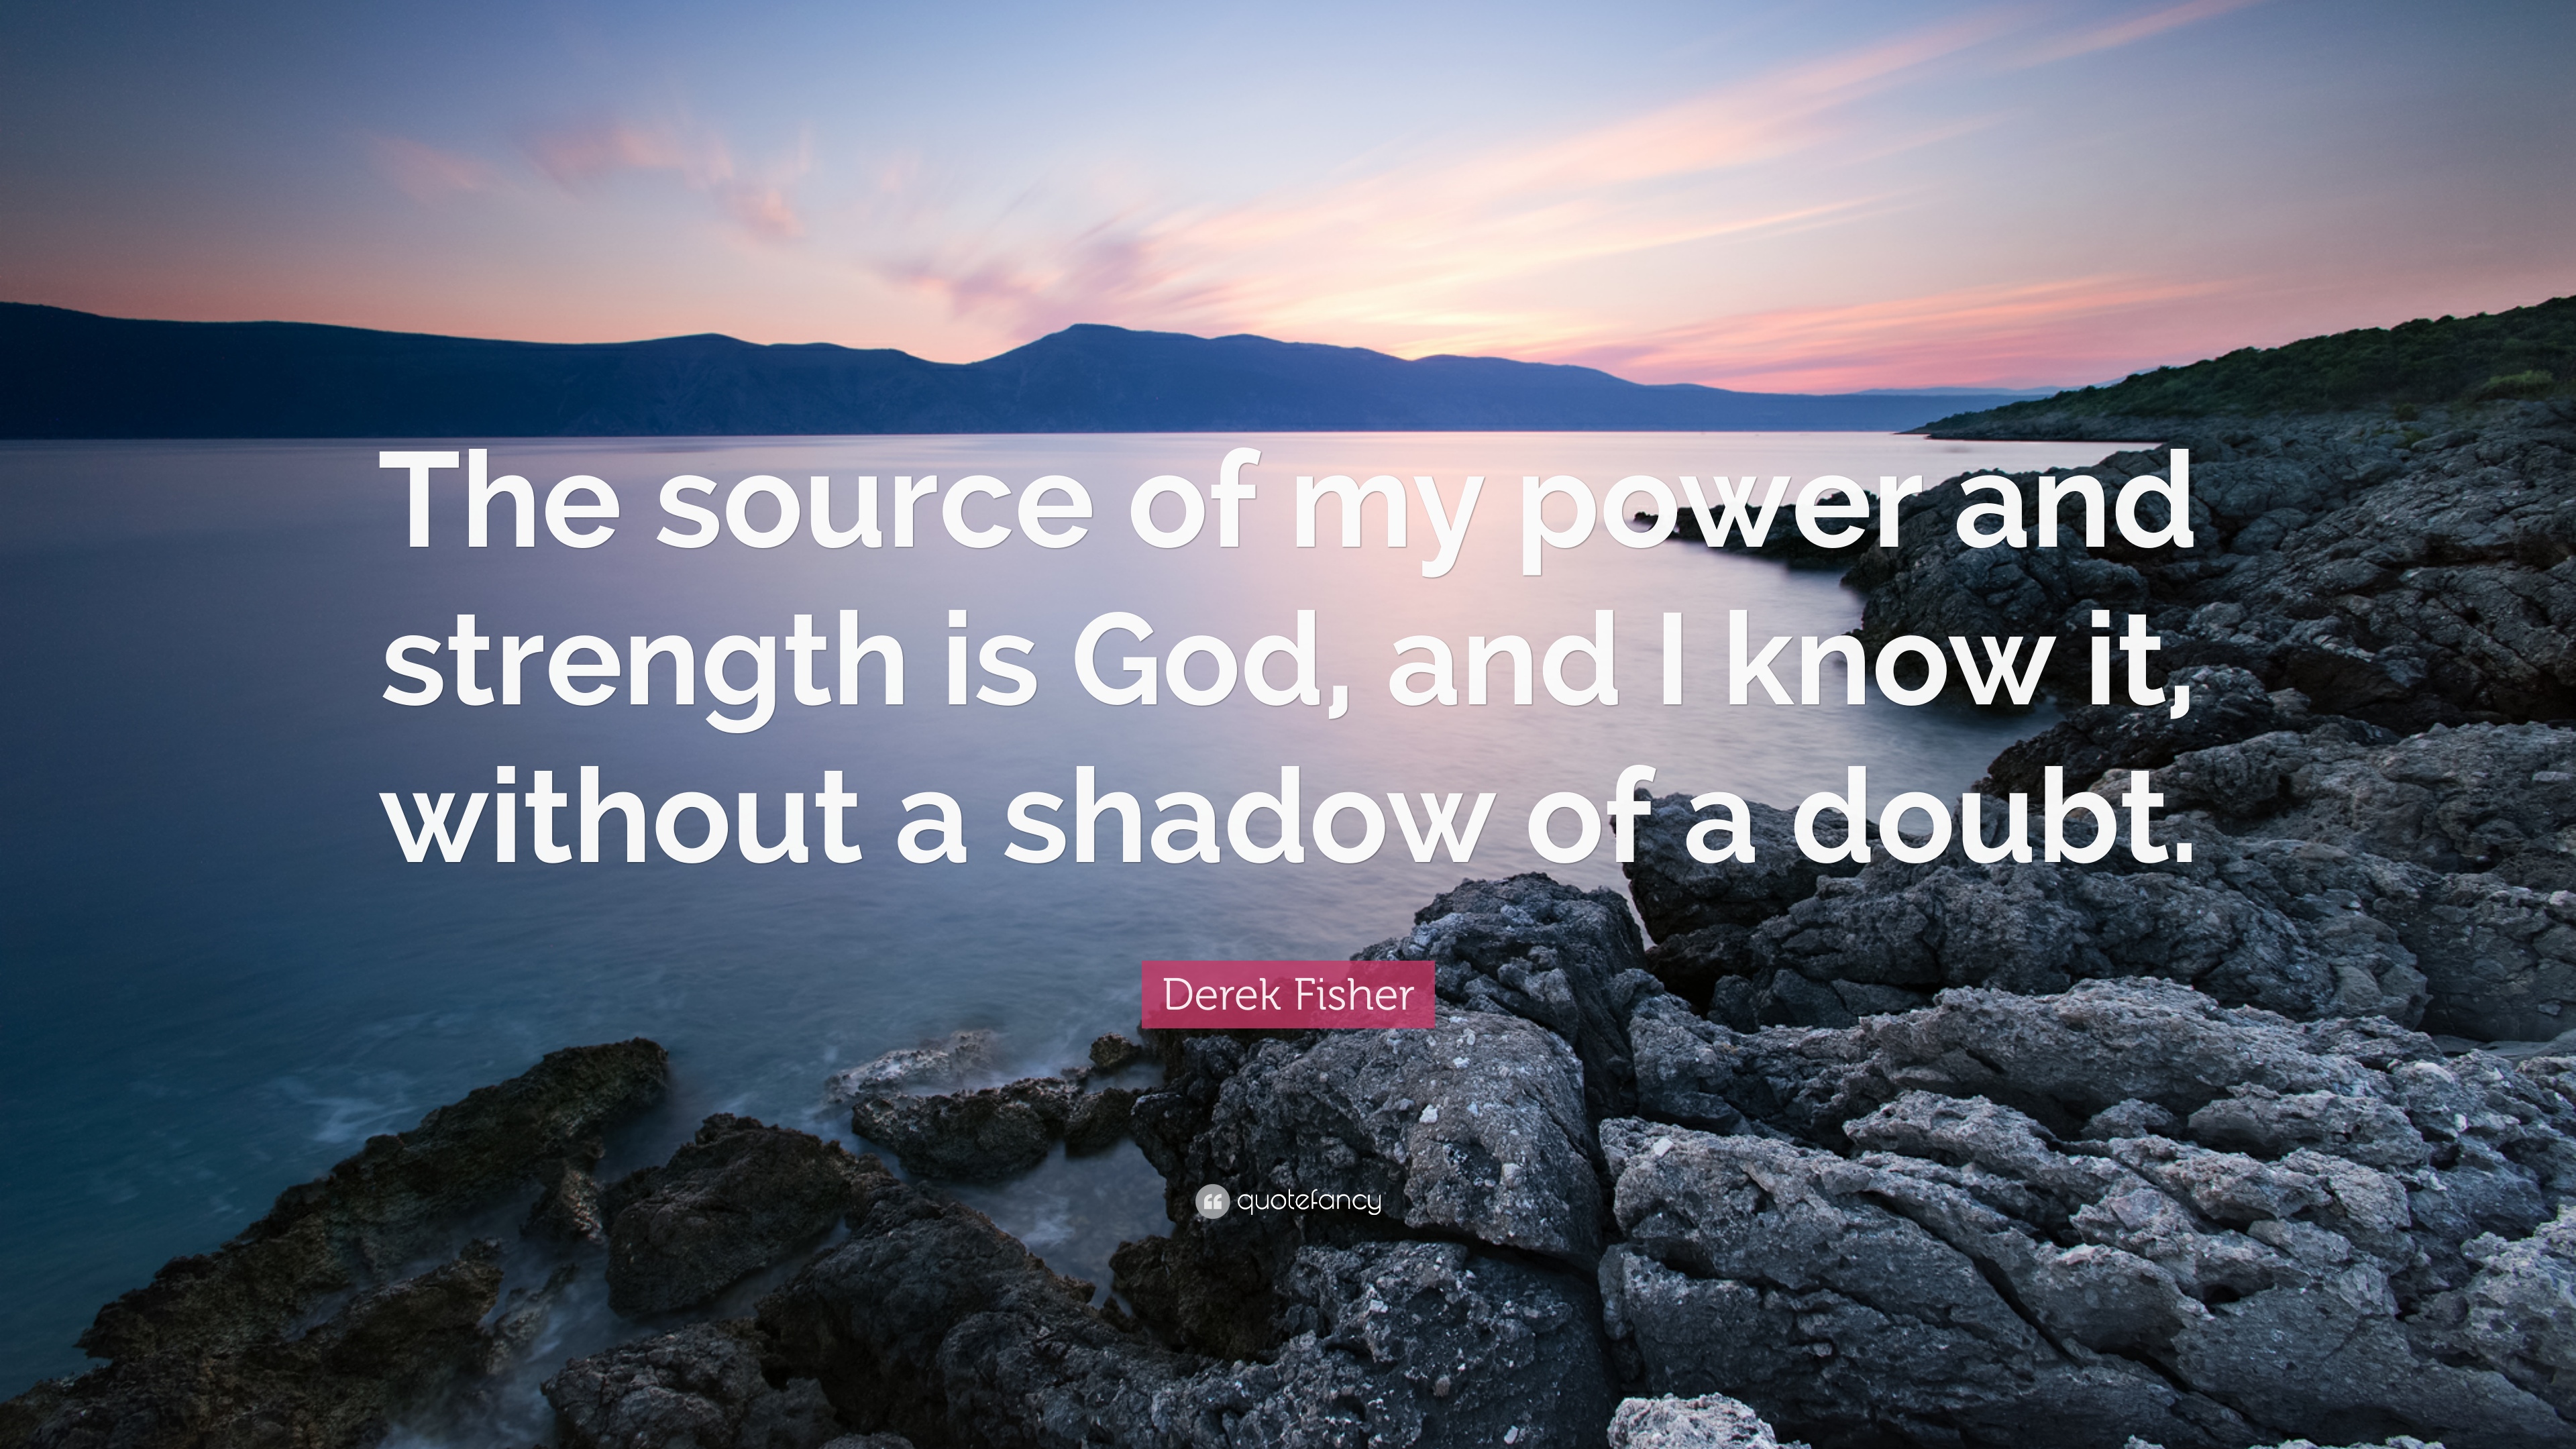 Derek Fisher Quote: “The source of my power and strength is God, and I know it